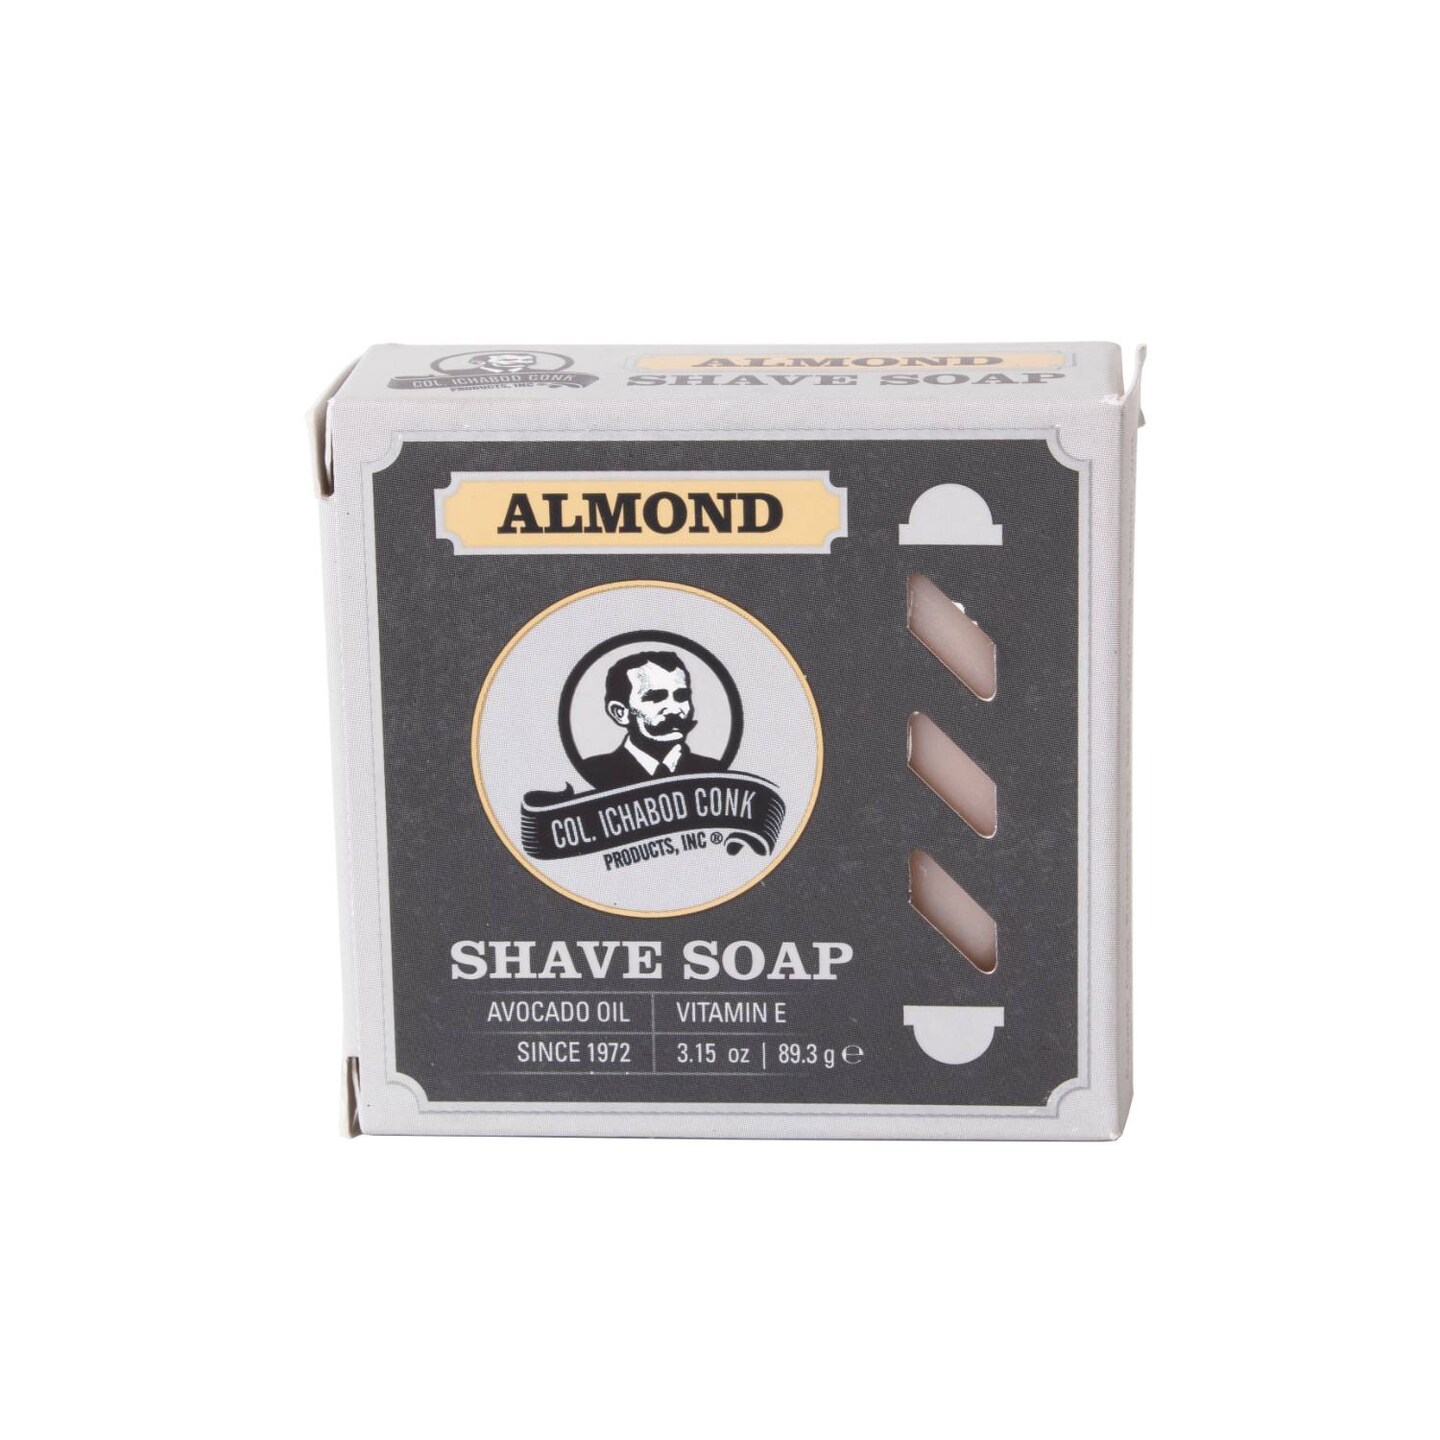 Colonel Conk Large Shaving Soap Almond Scented